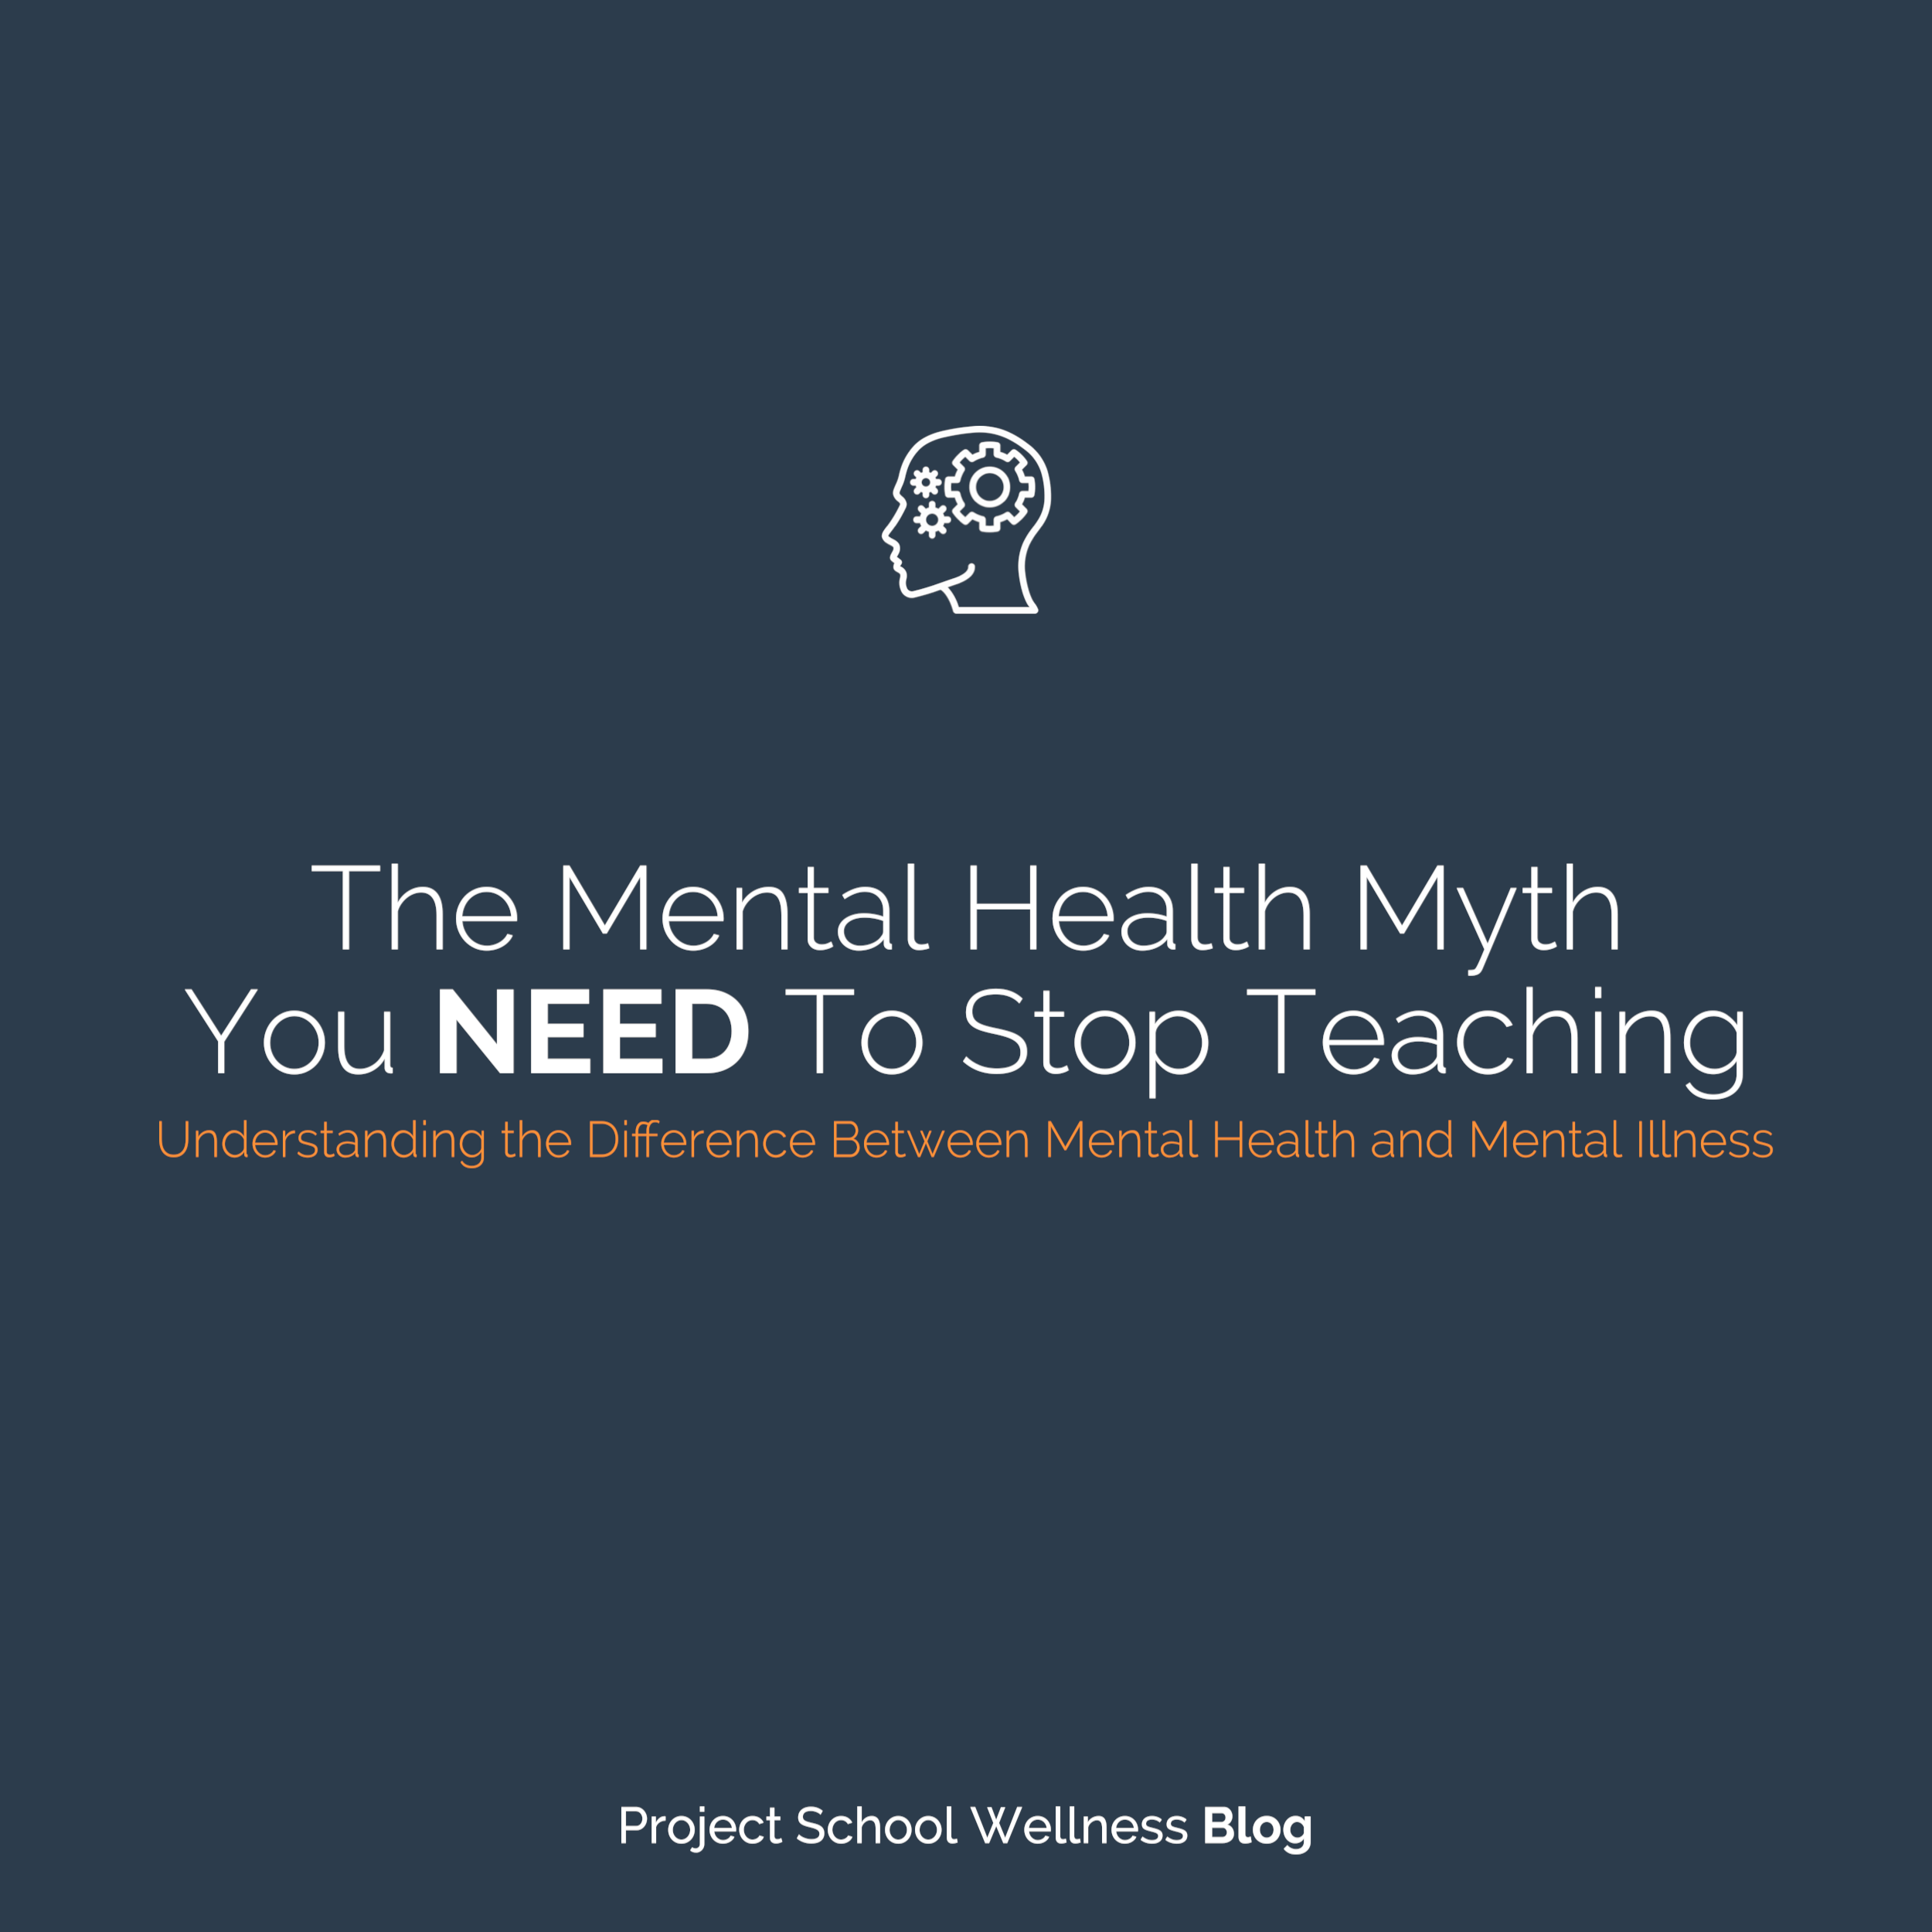 PSW Blog - The Mental Health Myth You NEED To Stop Teaching - Understanding the Difference Between Mental Health and Mental Illness